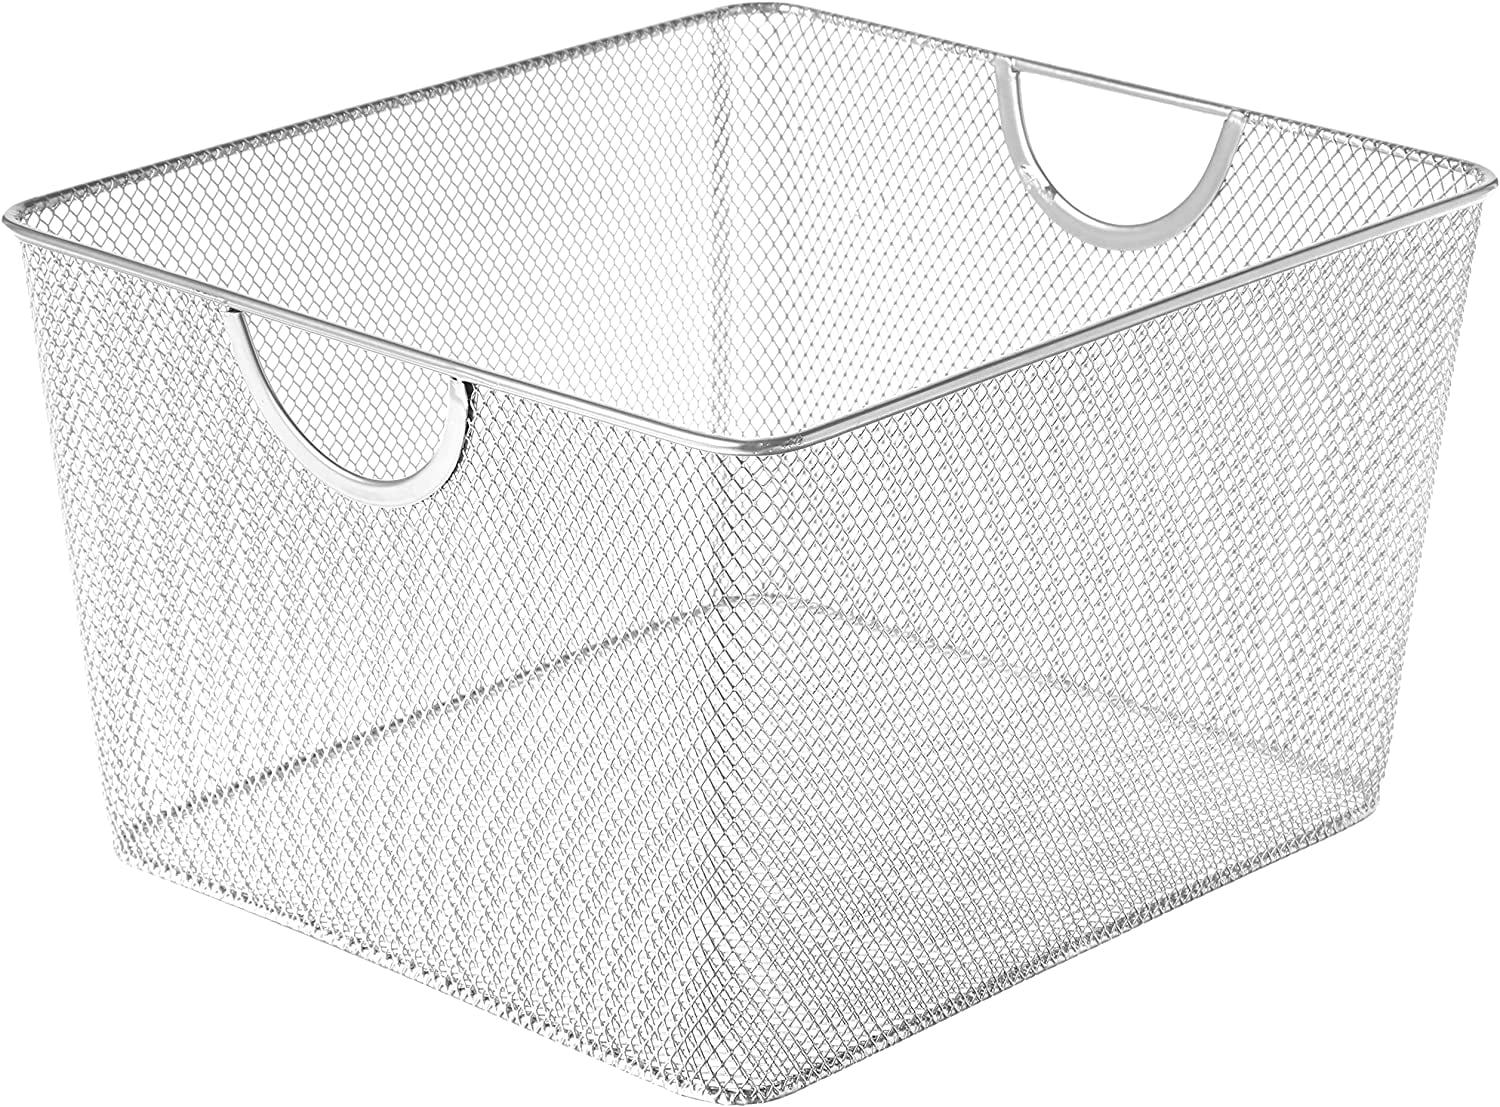 Mainstays Mesh Basket Kitchen Pantry Organization with Keyhole Handles for  Easy Carry Steel, 10x8x6 